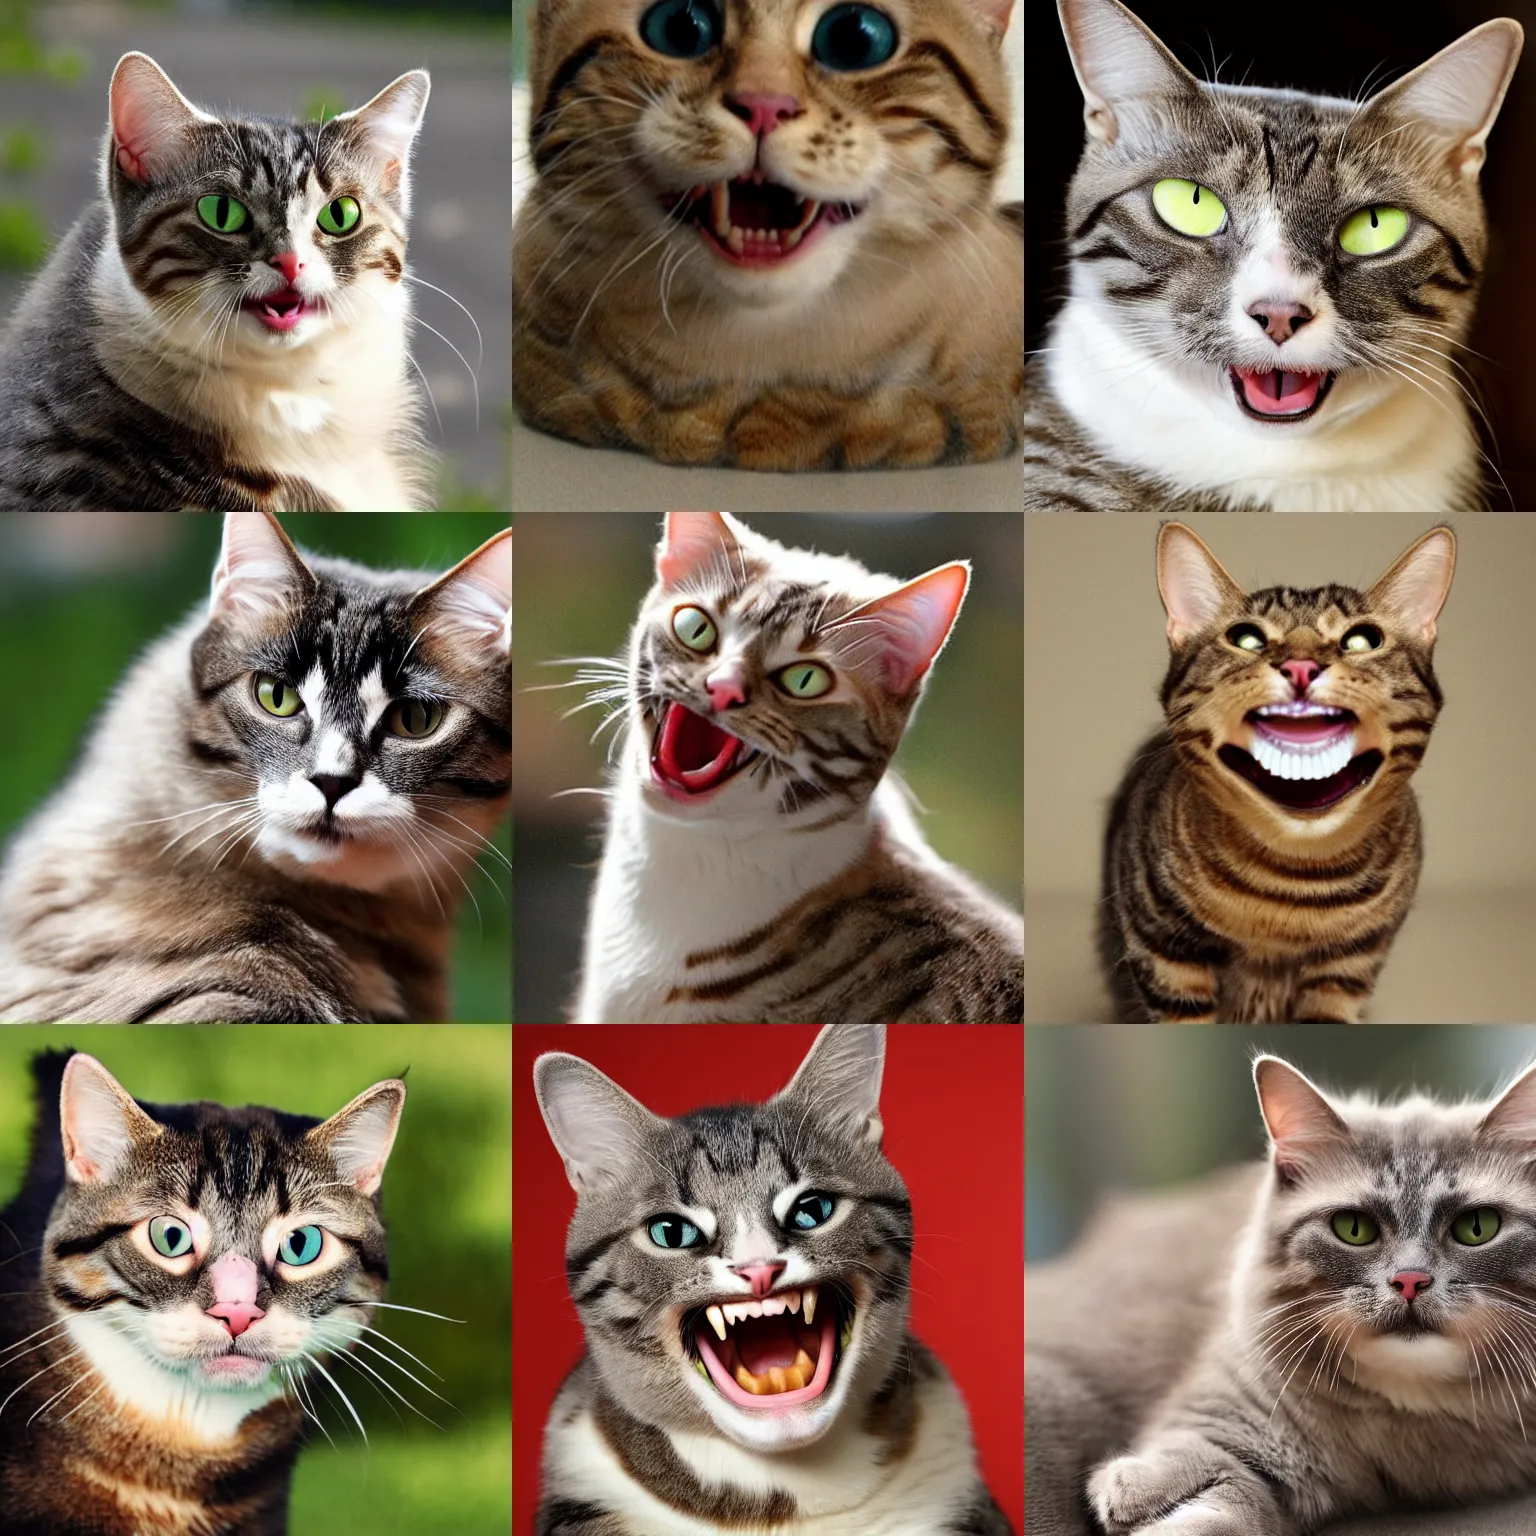 Prompt: Cat scrunge, sneering cat showing teeth in a comical grimace, scrungy, scrunges, scrunged